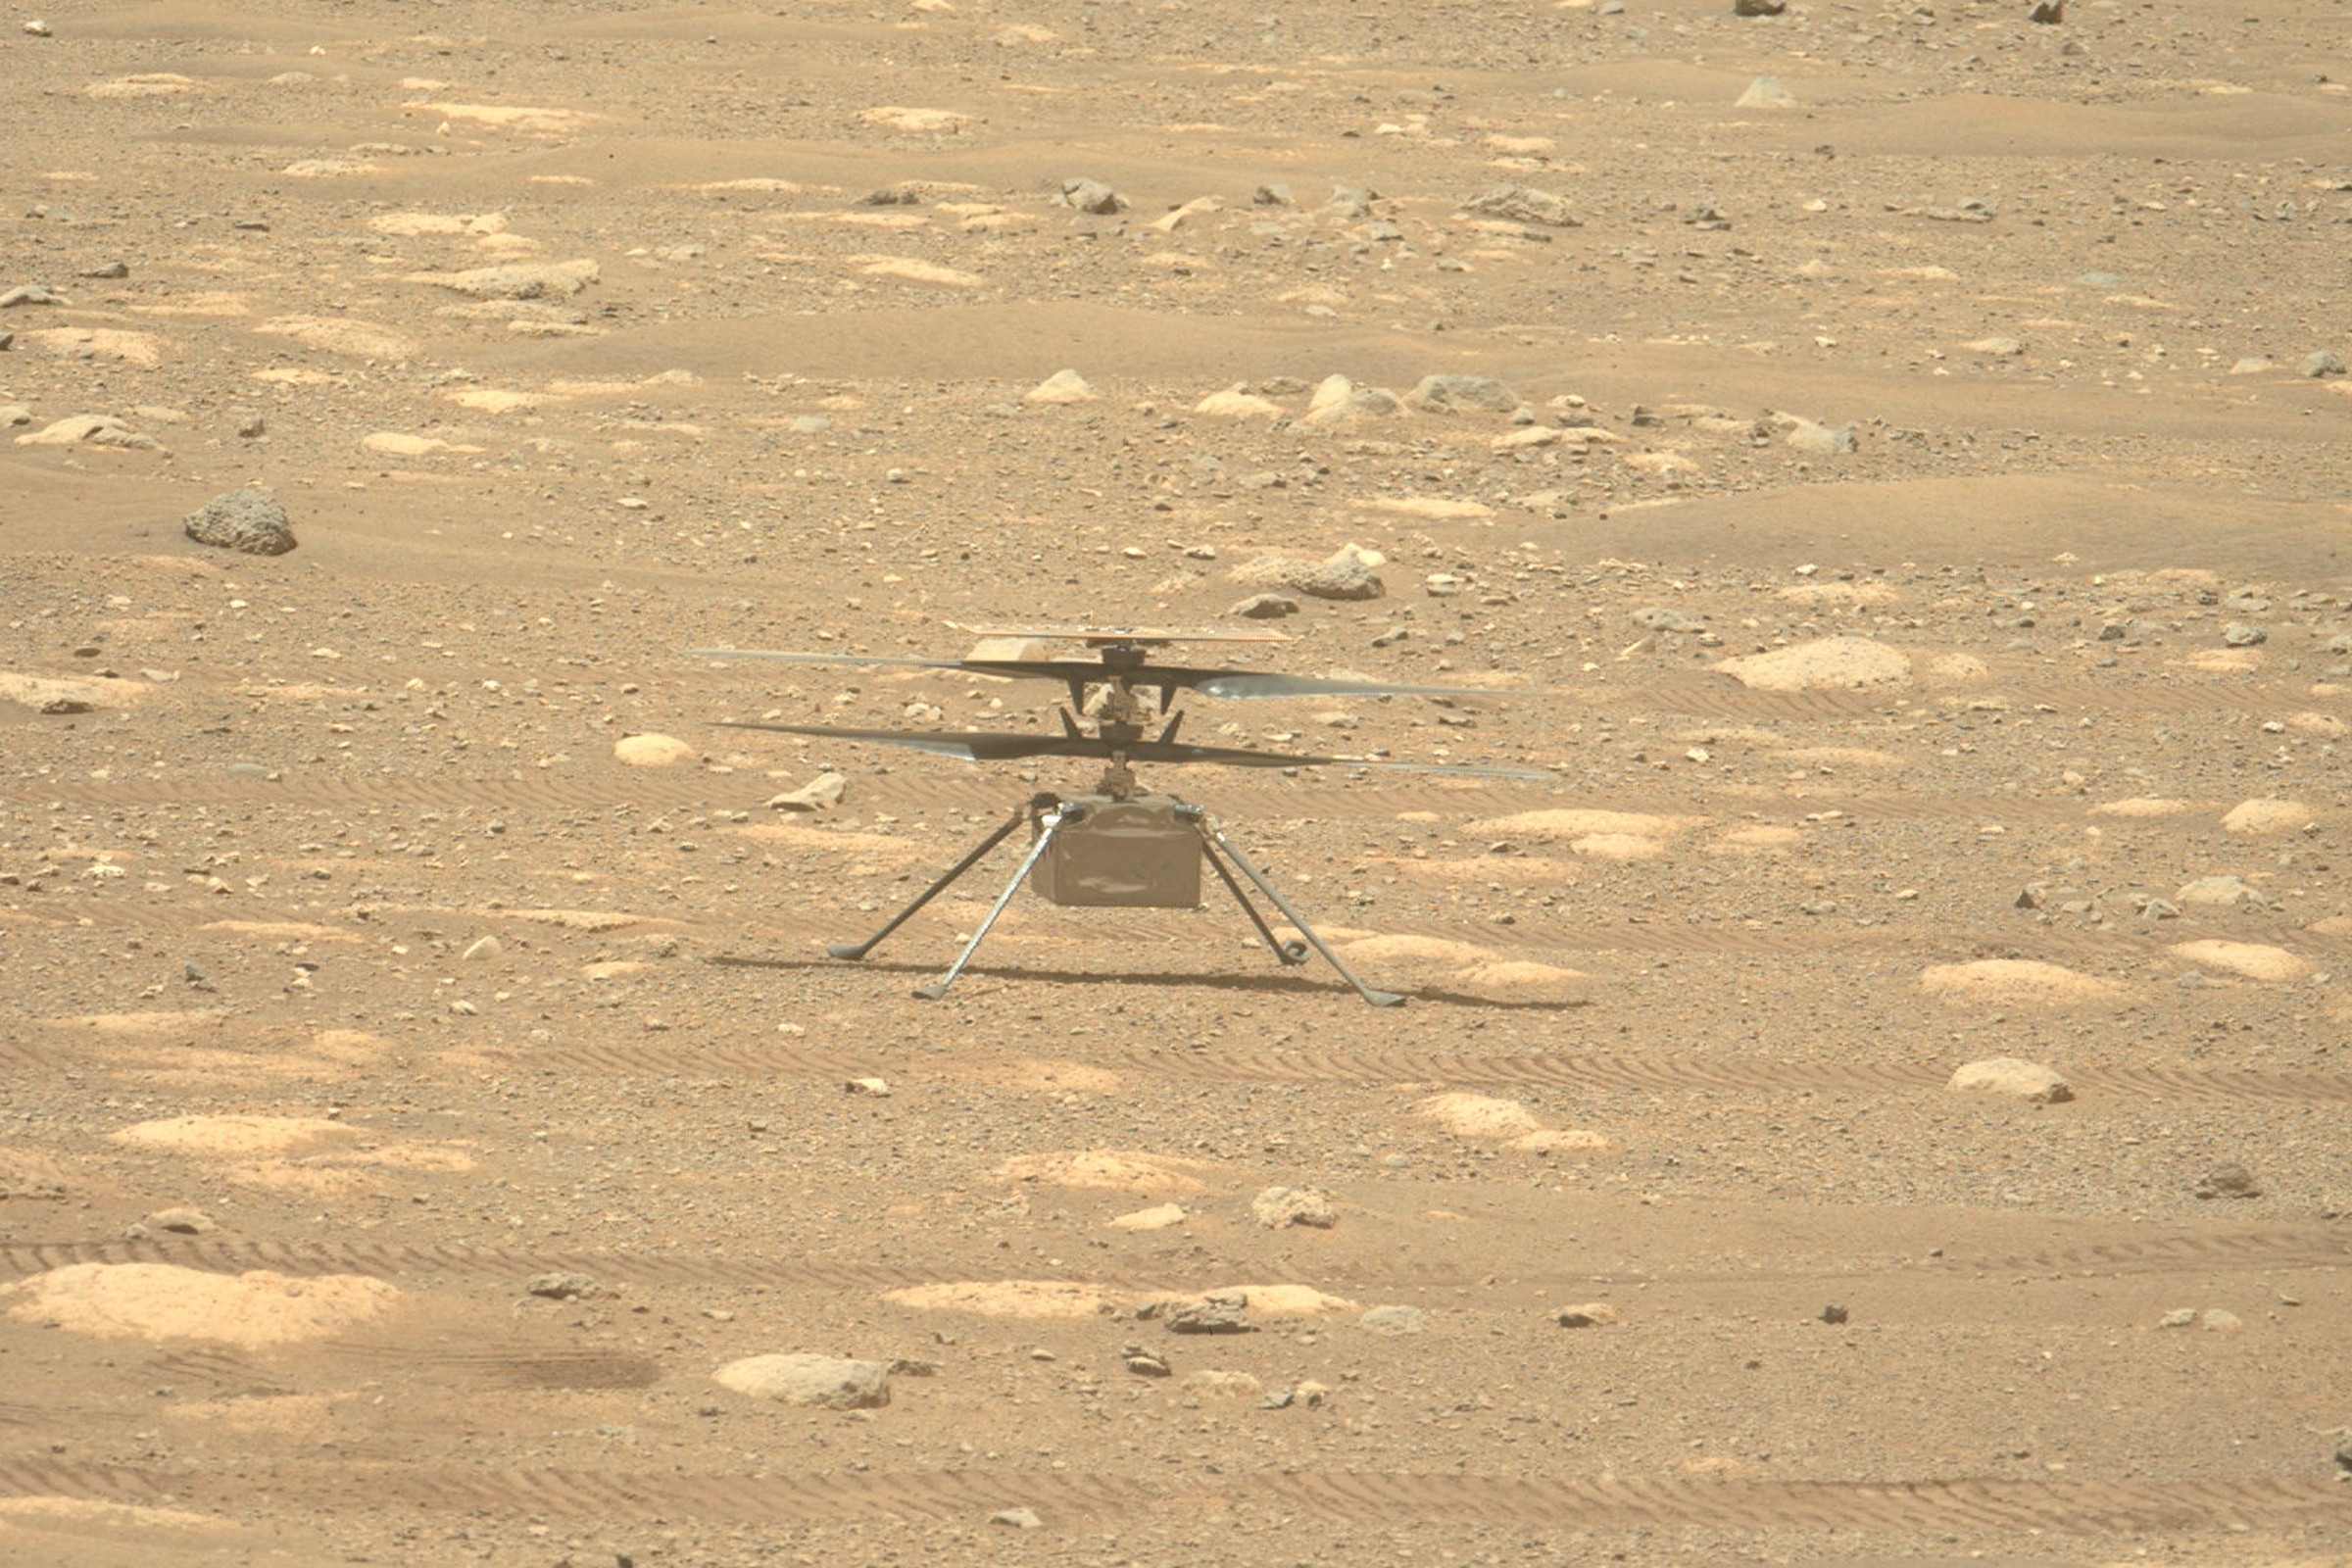 NASA’s Ingenuity helicopter stands prepped and set for its debut flight on Mars.